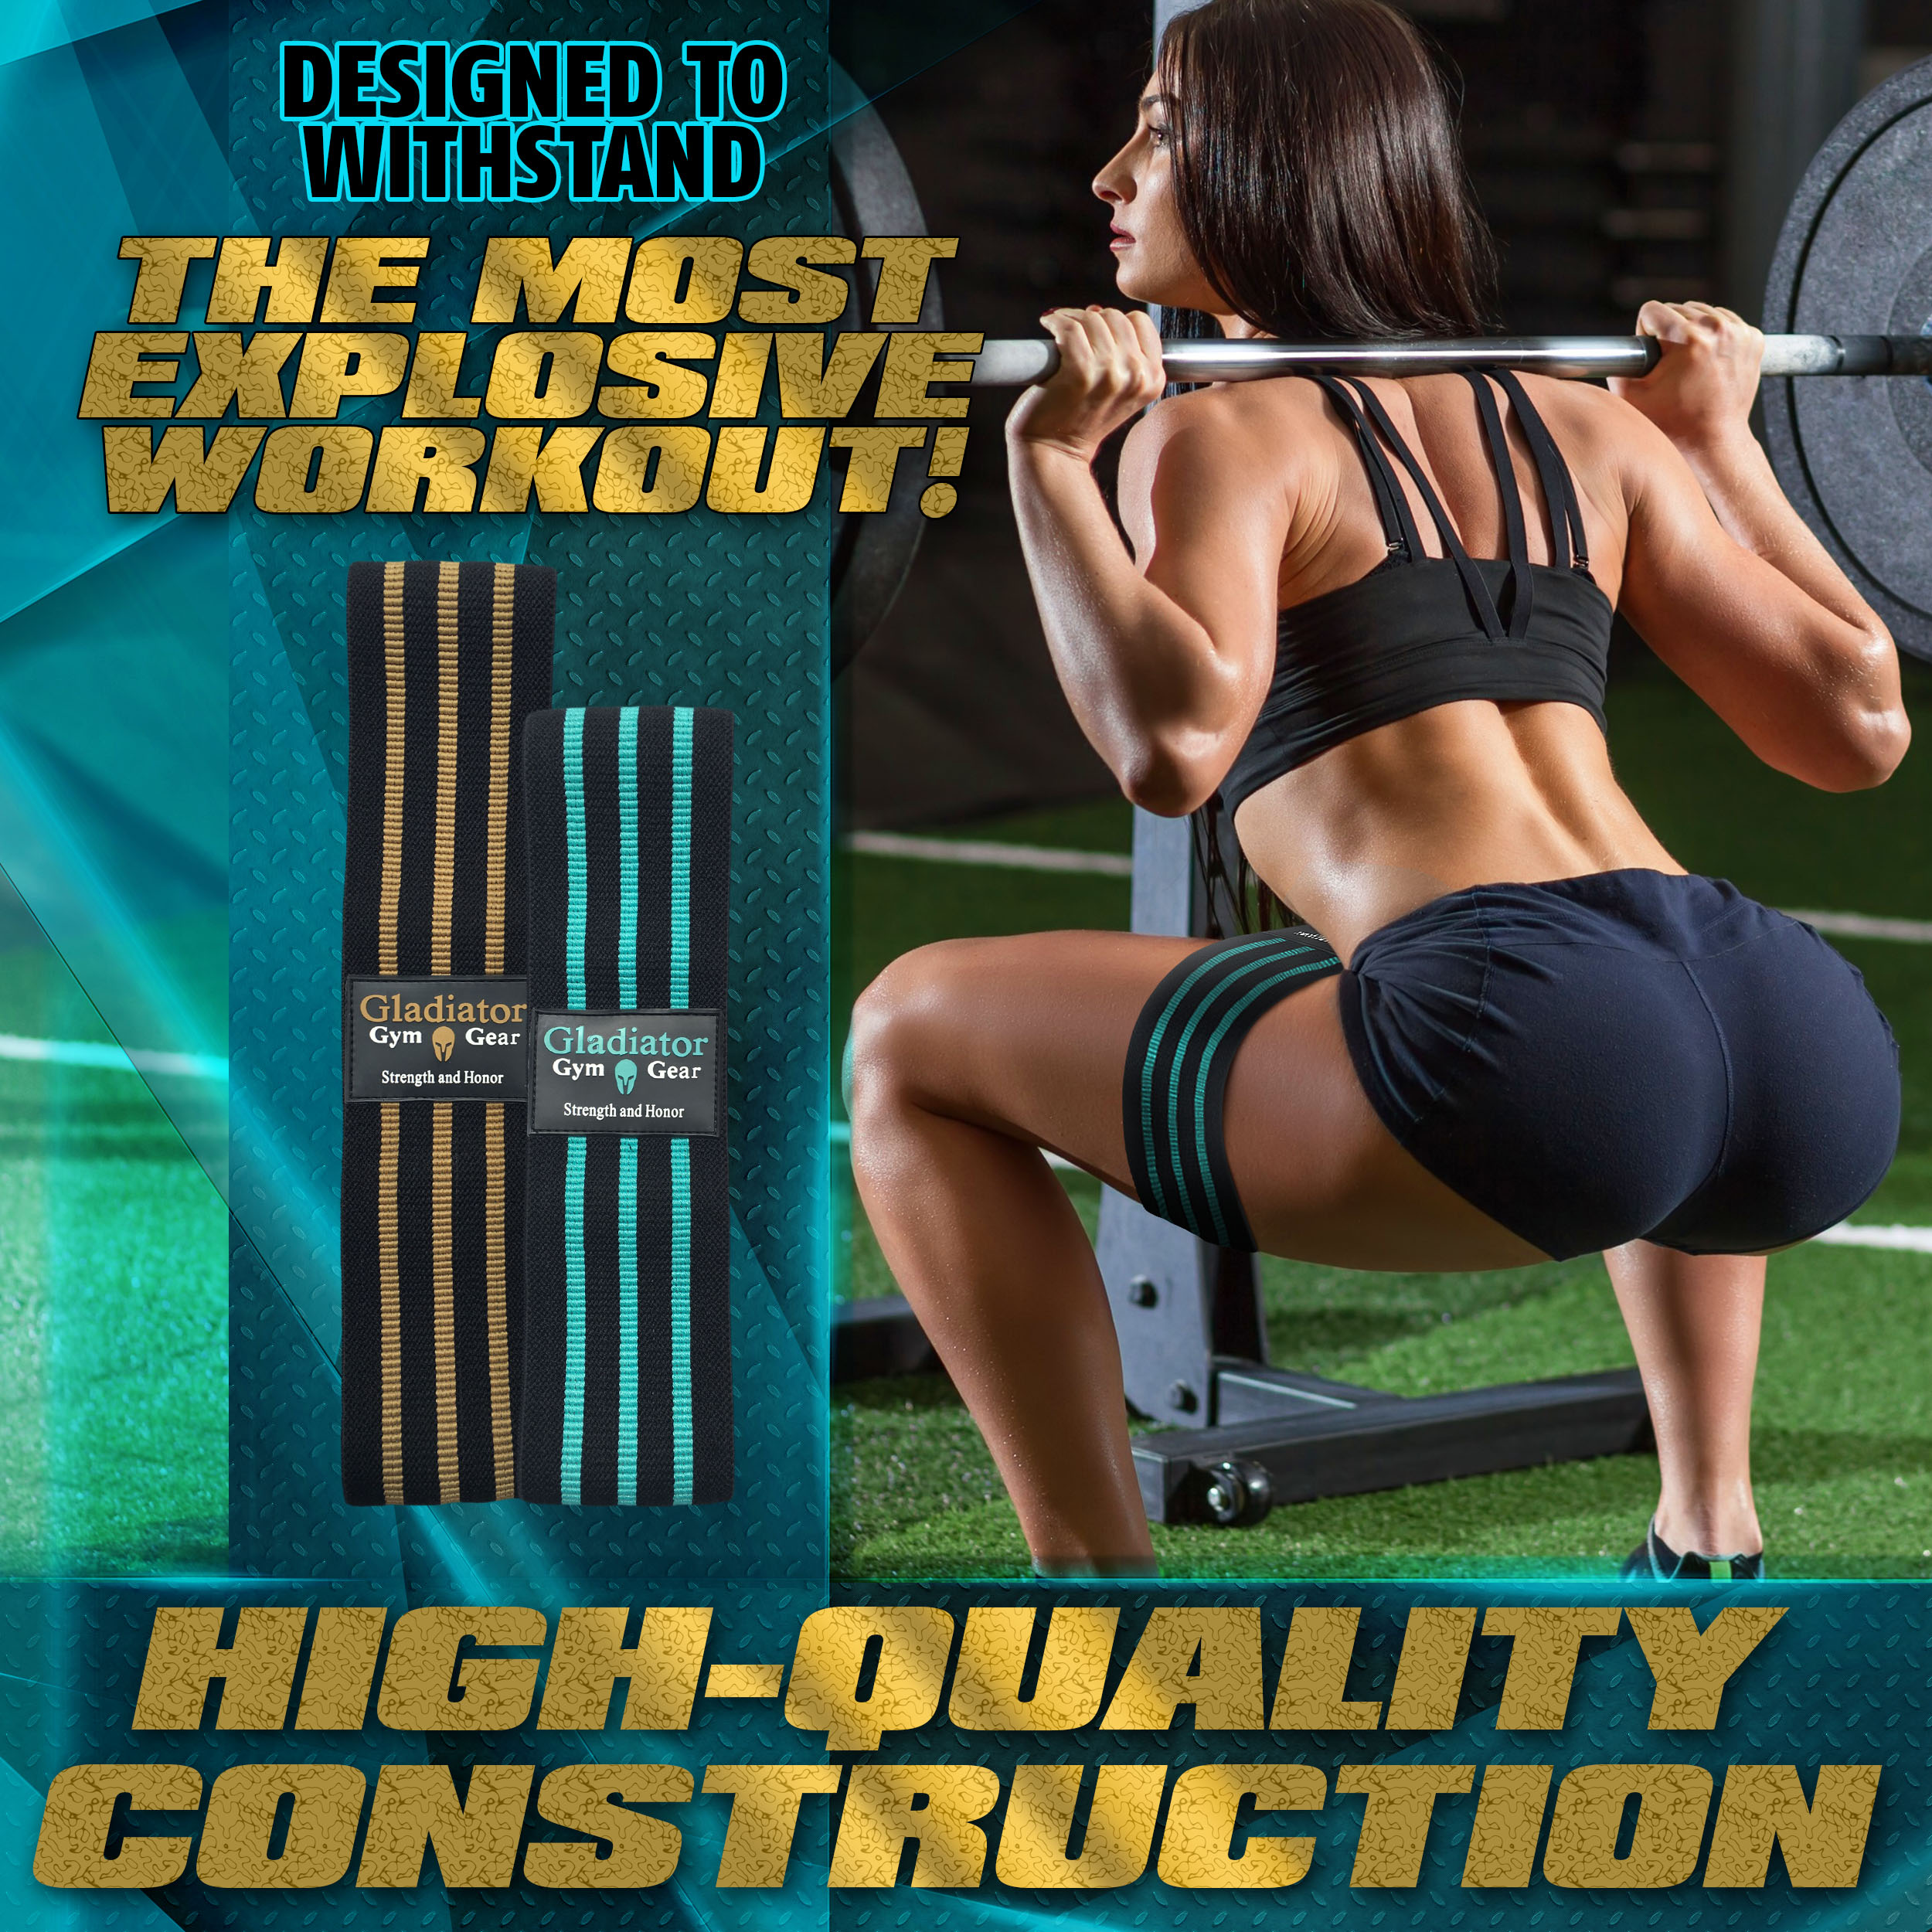 BOOTY GLUTE CLOTH RESISTANCE HIP BANDS - Non Slip - Thick Fabric SQUAT BAND - 2 Pack - for Workout, Exercise, & Fitness. G3 HIP THRUSTER LOOP BANDS are Great Resistant Bands for LEGS and BUTT - image 3 of 7